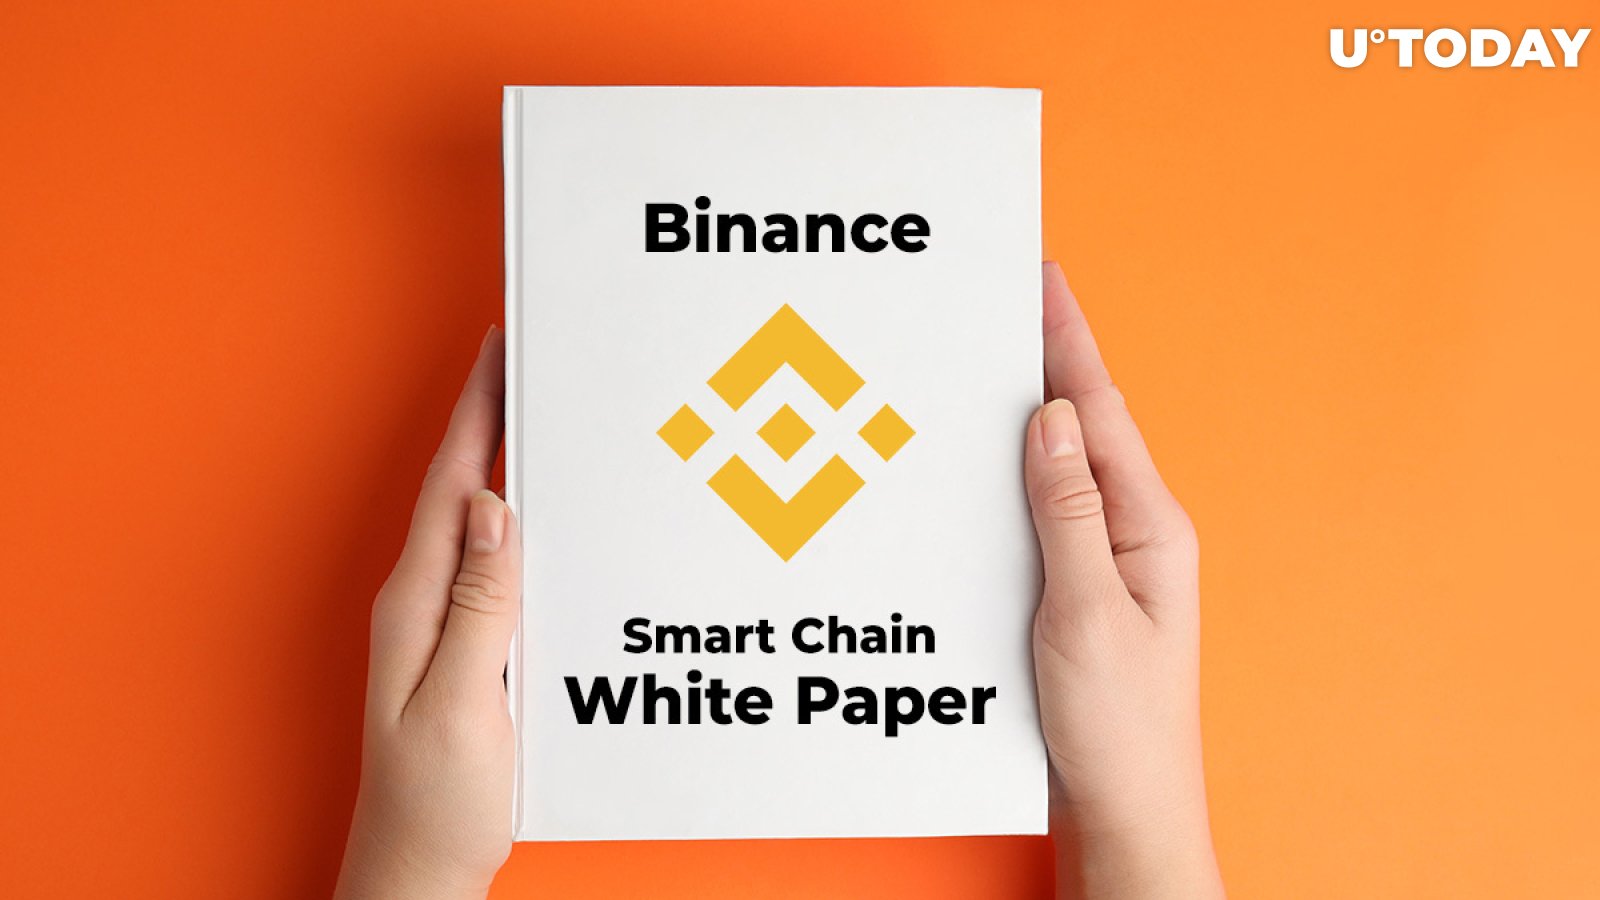 contract address for binance smart chain